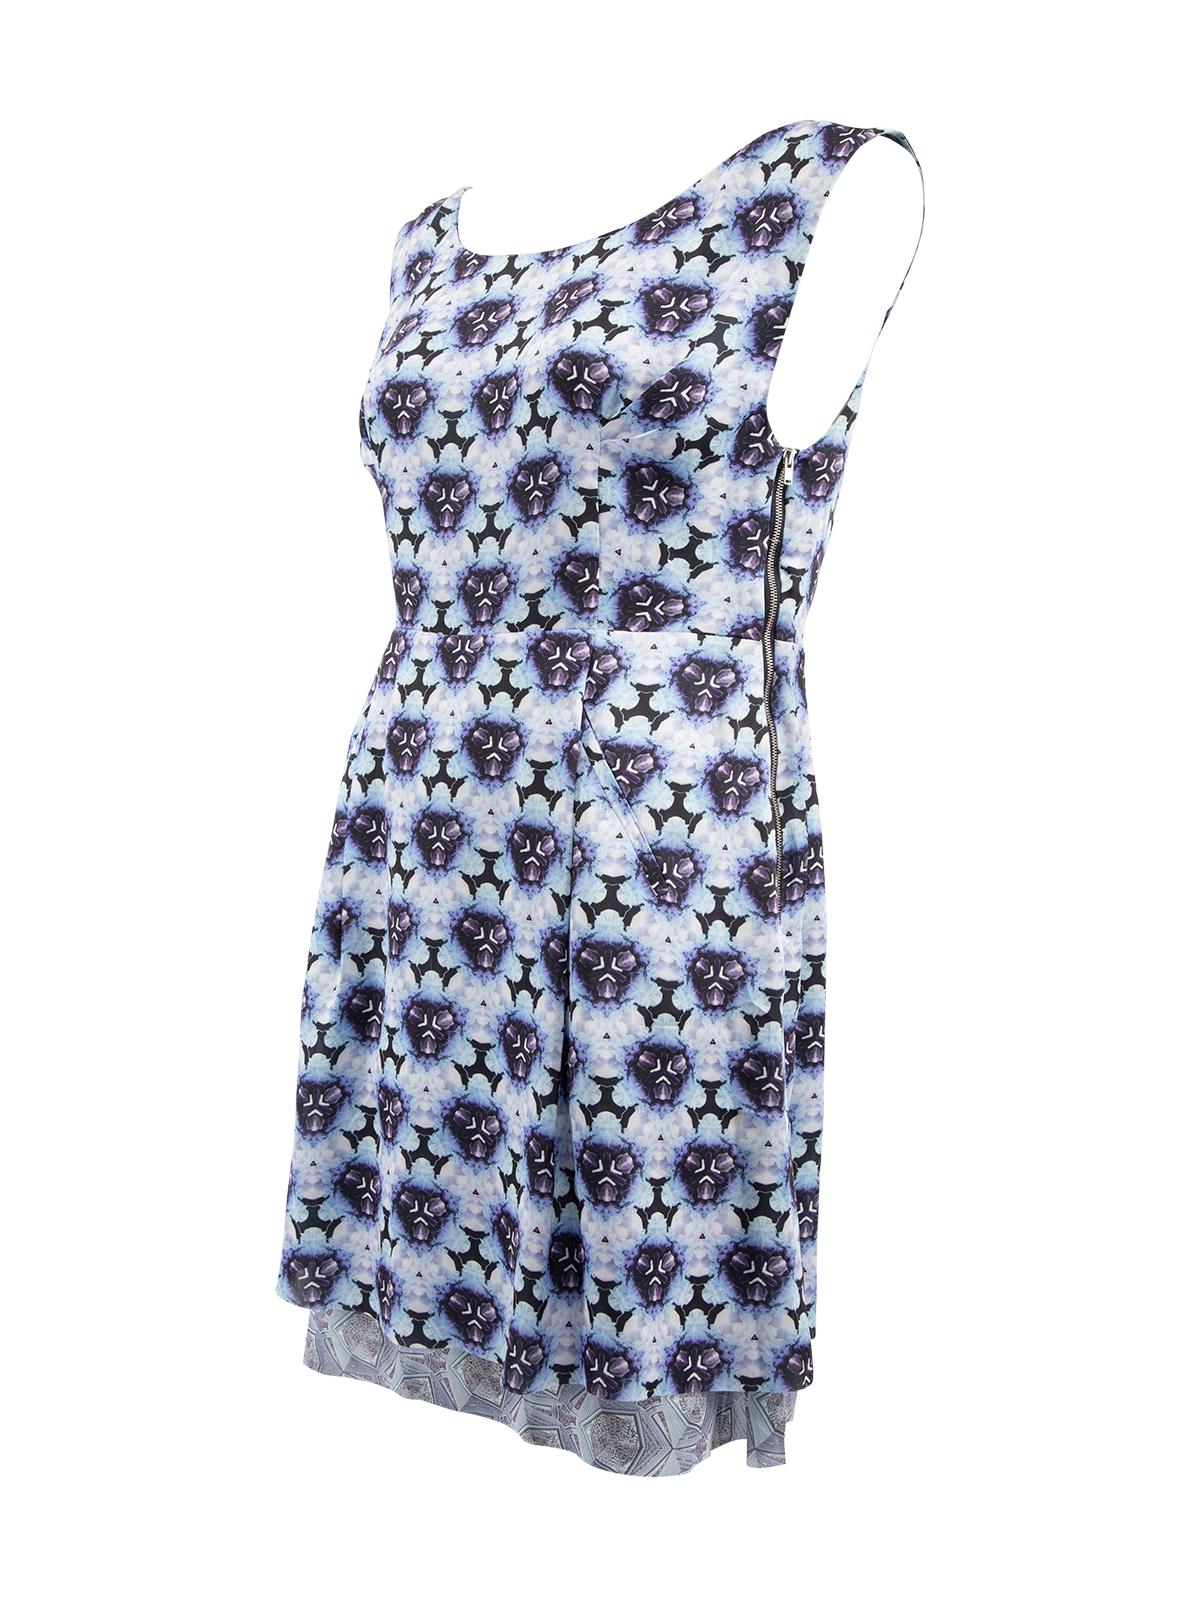 Pre-Loved Acne Studios Women's Kaleidoscope Patterned Dress In Excellent Condition In London, GB